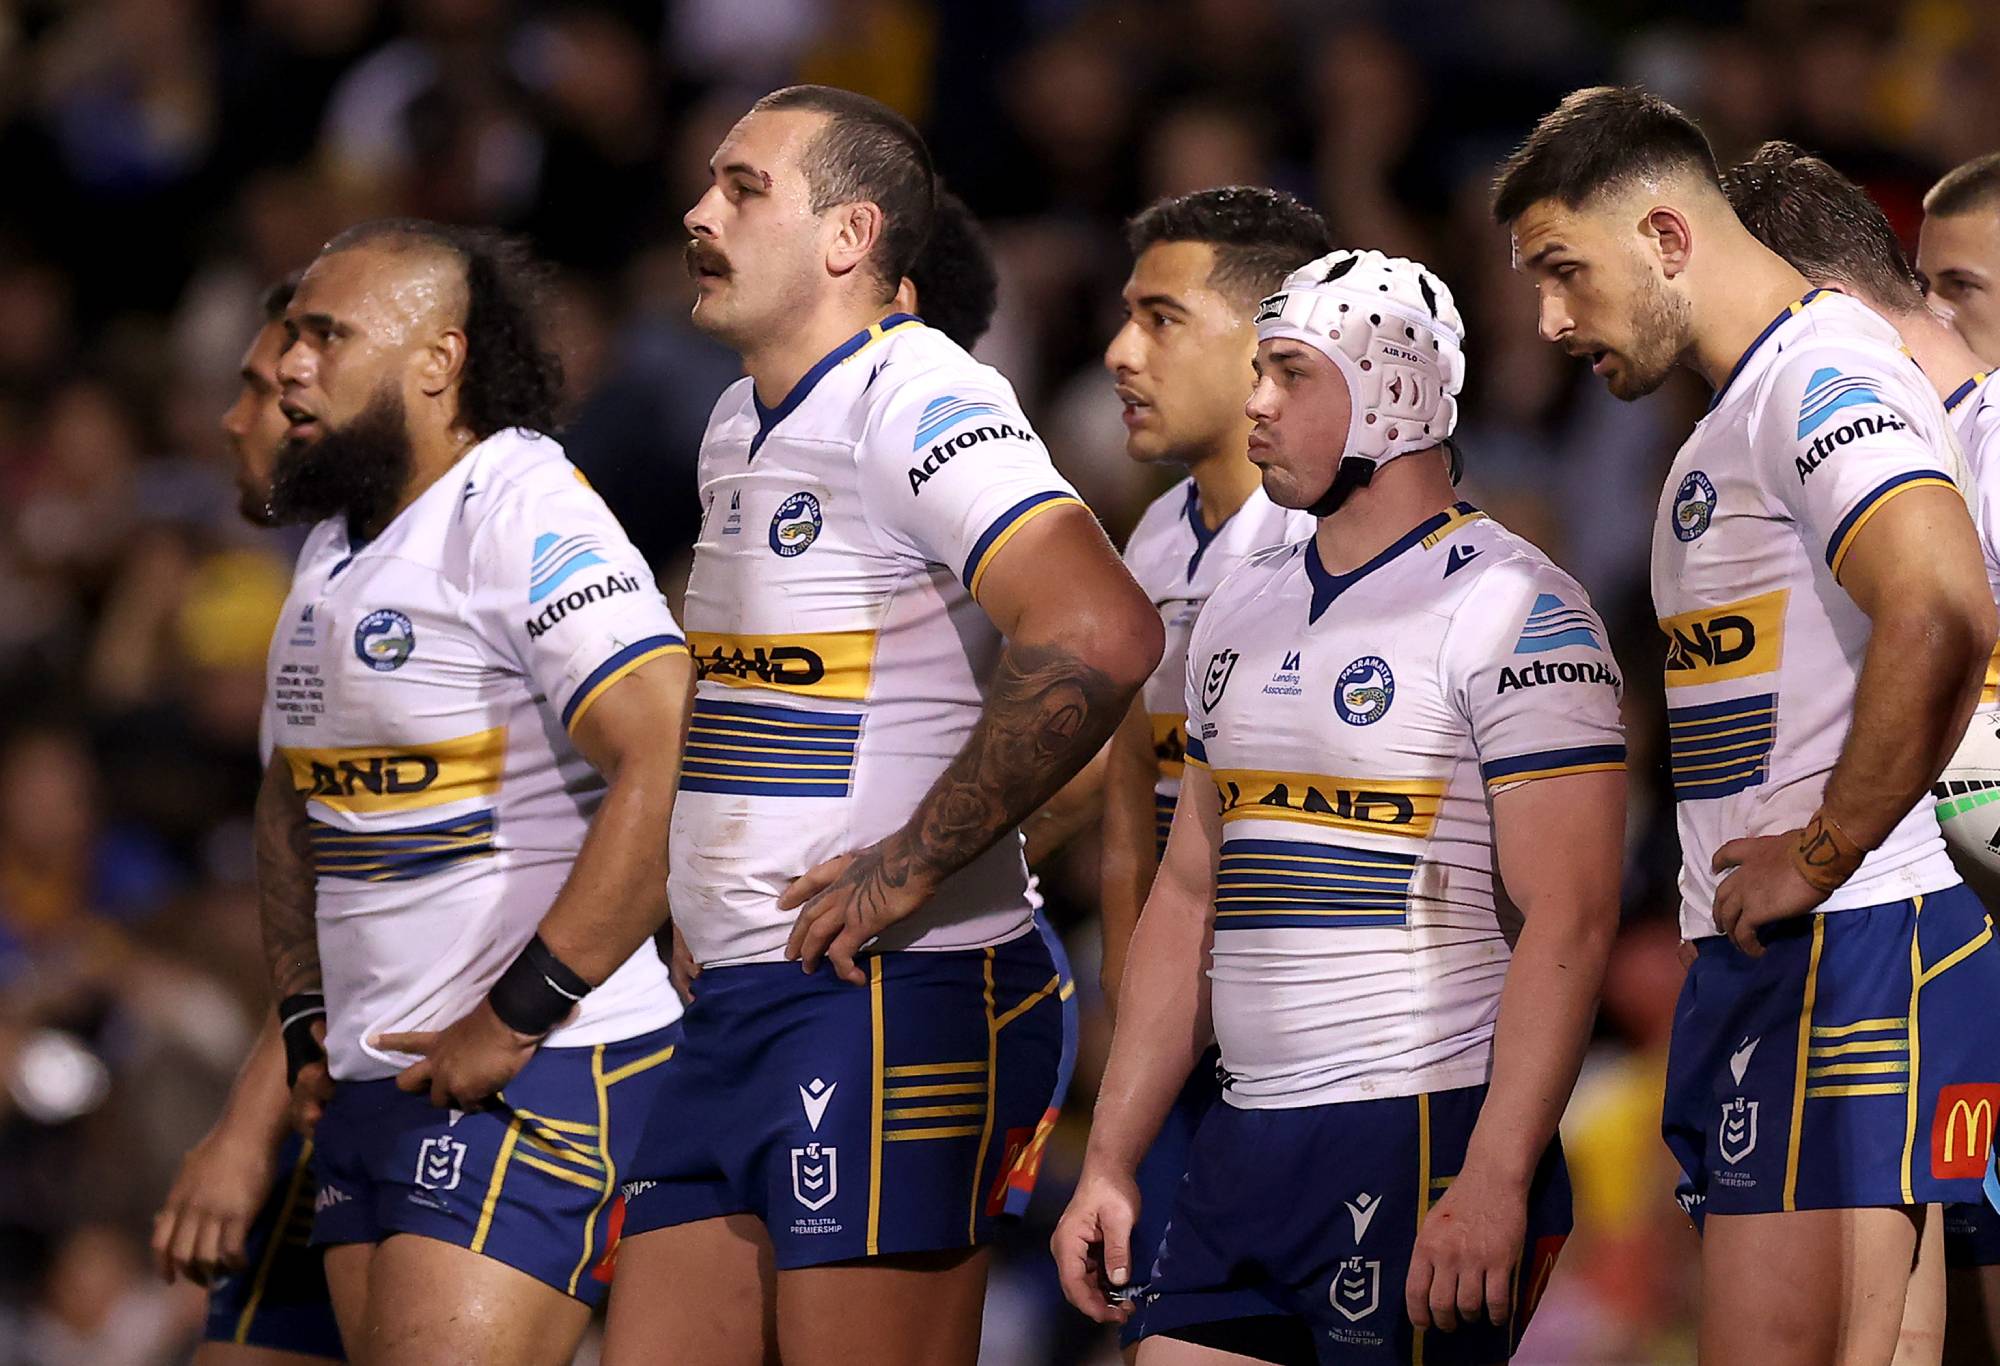 PENRITH, AUSTRALIA - SEPTEMBER 09: Eels players look on after a Panthers try during the NRL Qualifying Final match between the Penrith Panthers and the Parramatta Eels at BlueBet Stadium on September 09, 2022 in Penrith, Australia. (Photo by Mark Kolbe/Getty Images)